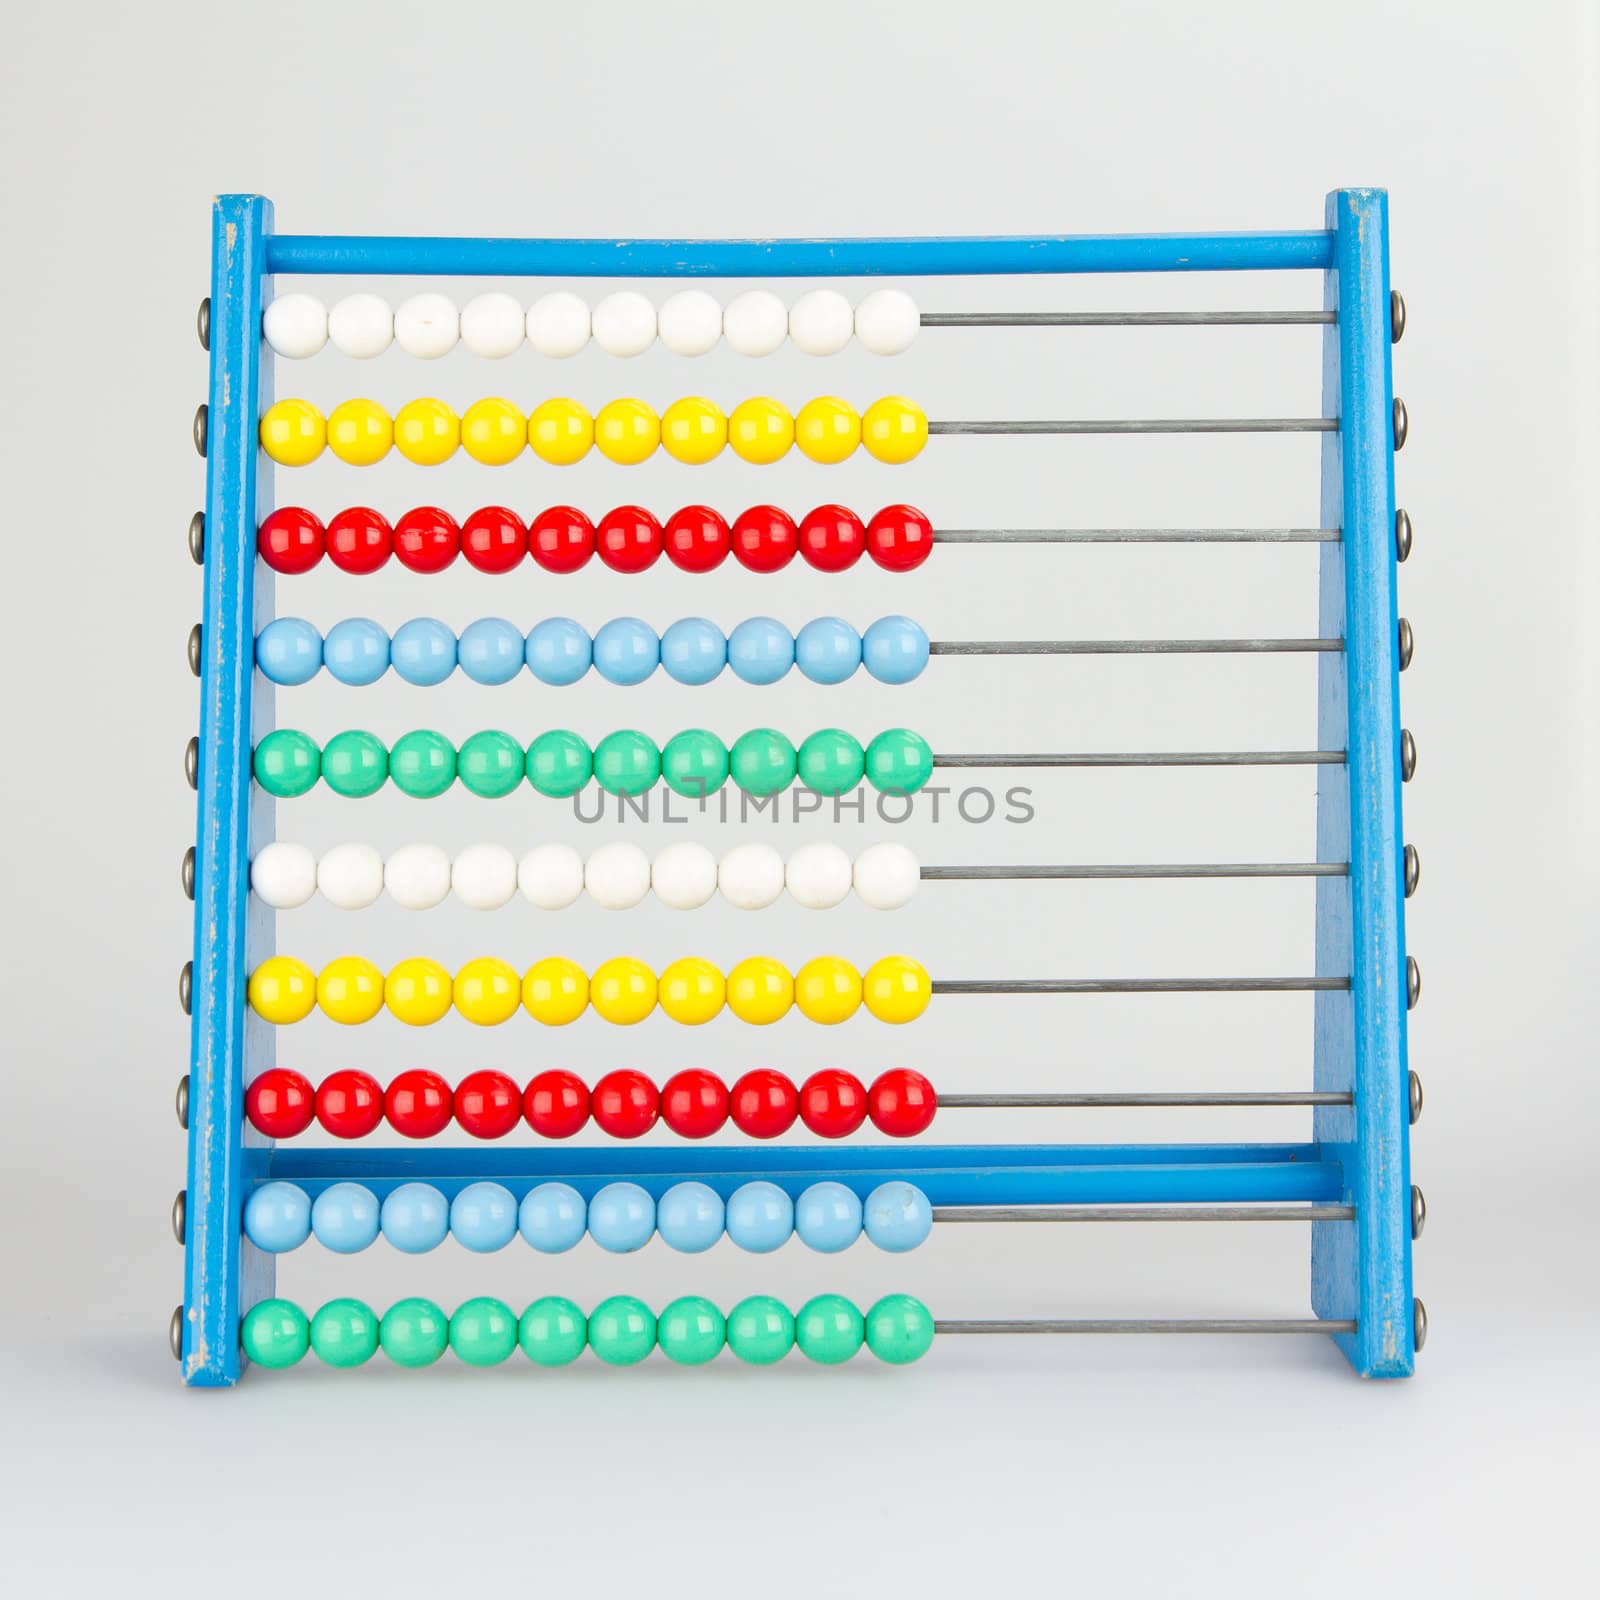 Close-up of an abacus on a white background by michaklootwijk